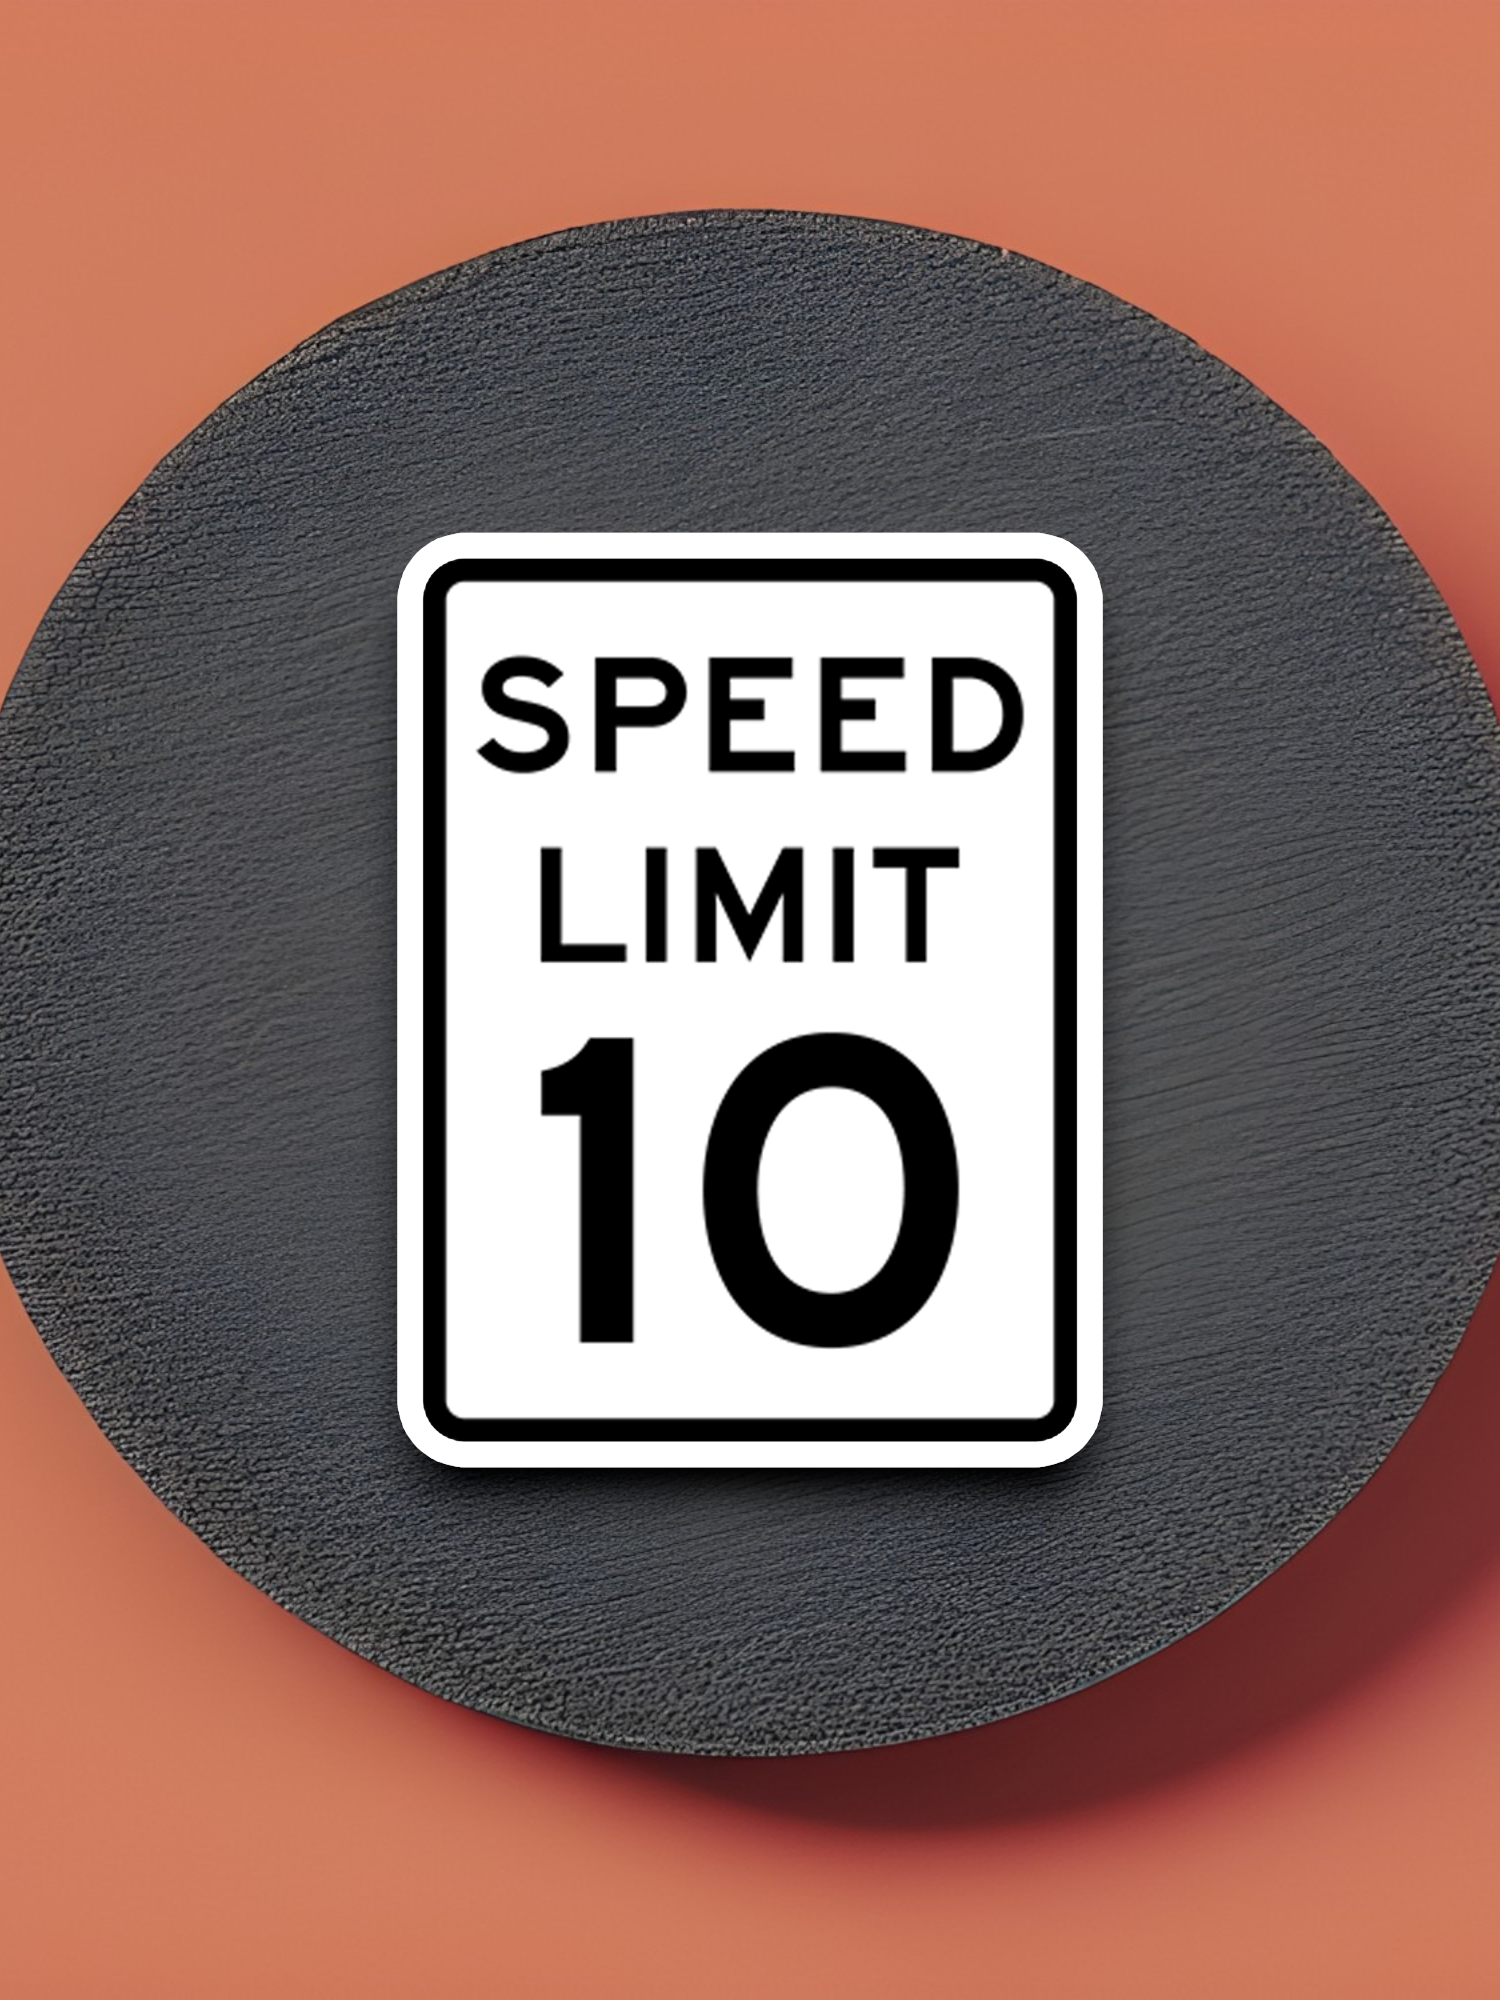 10 Miles Per Hour Speed Limit Road Sign Sticker